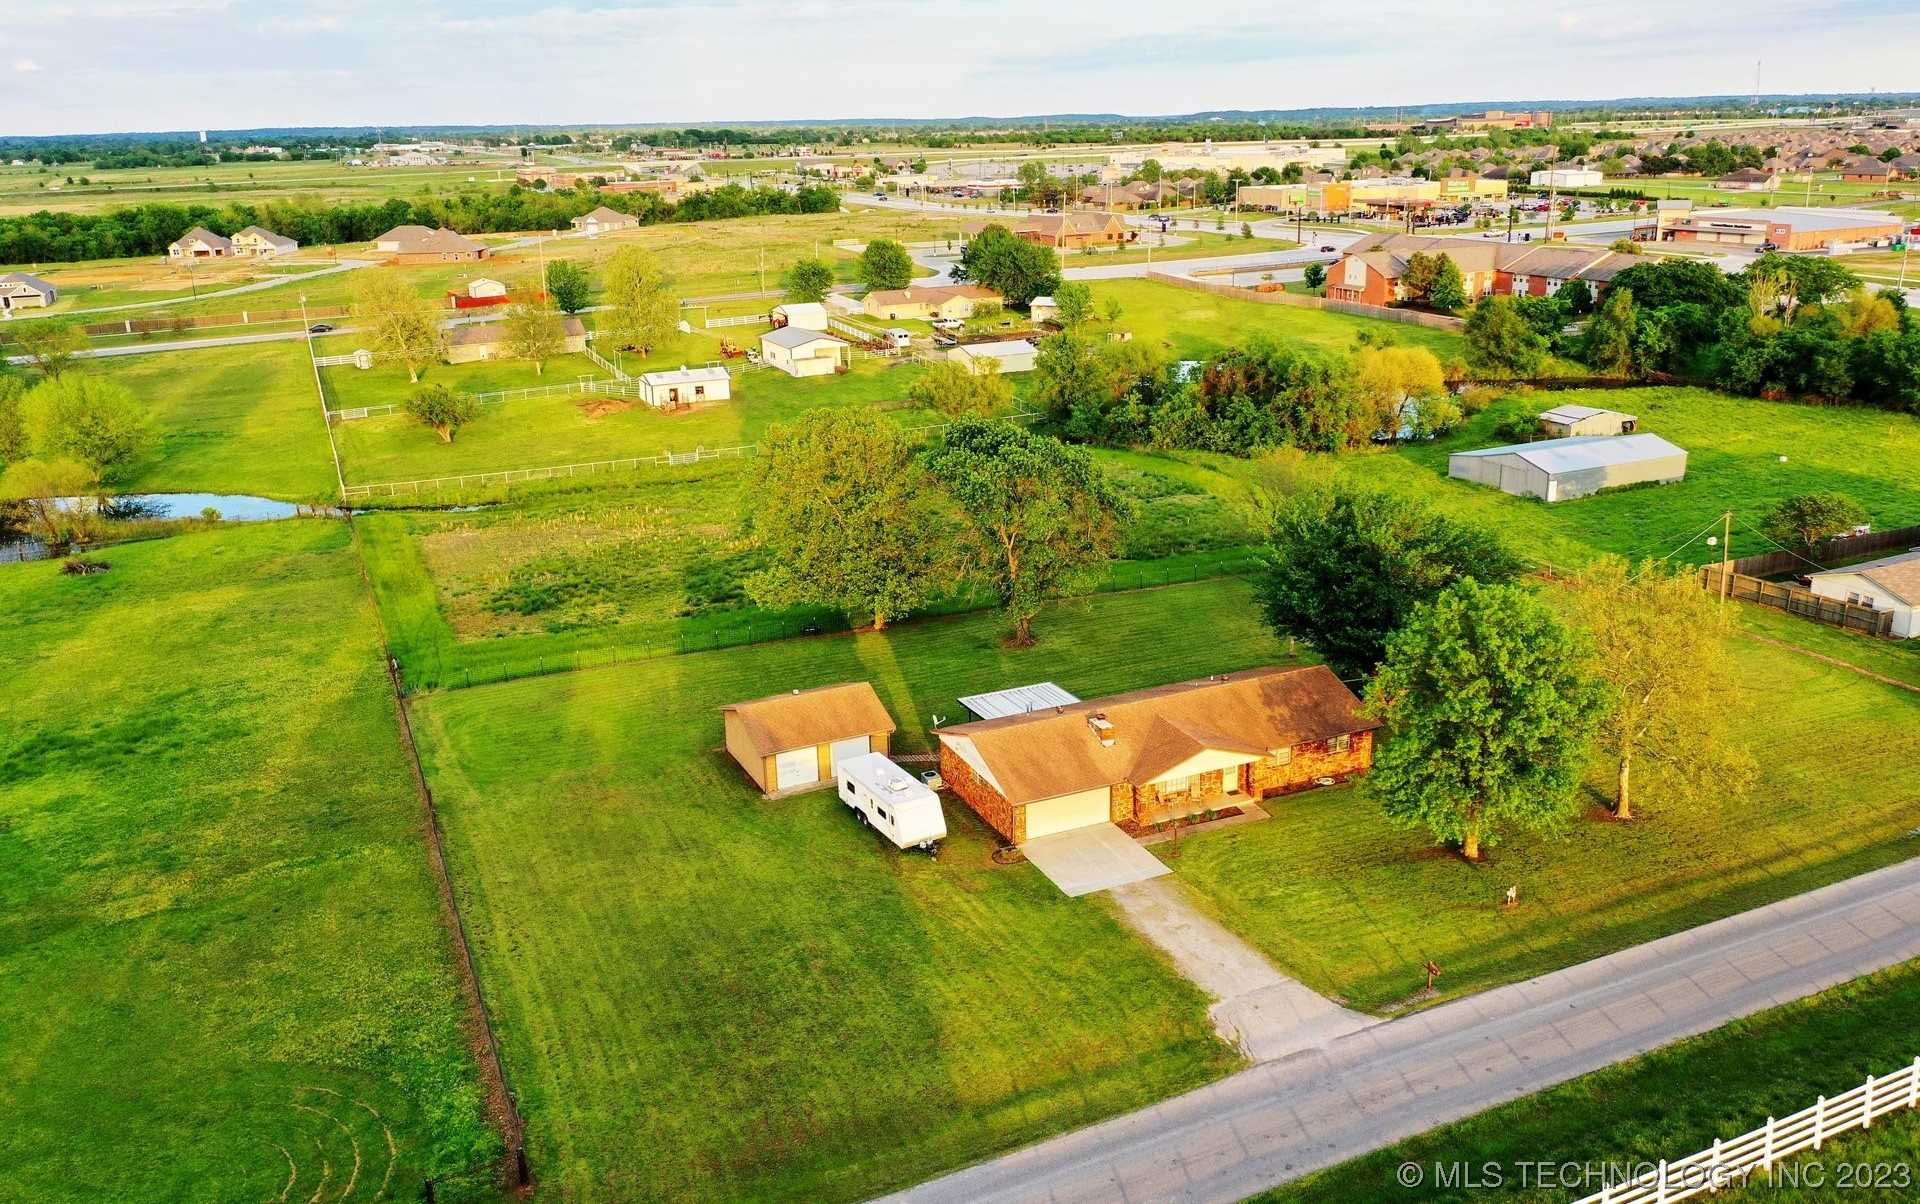 View Collinsville, OK 74021 house